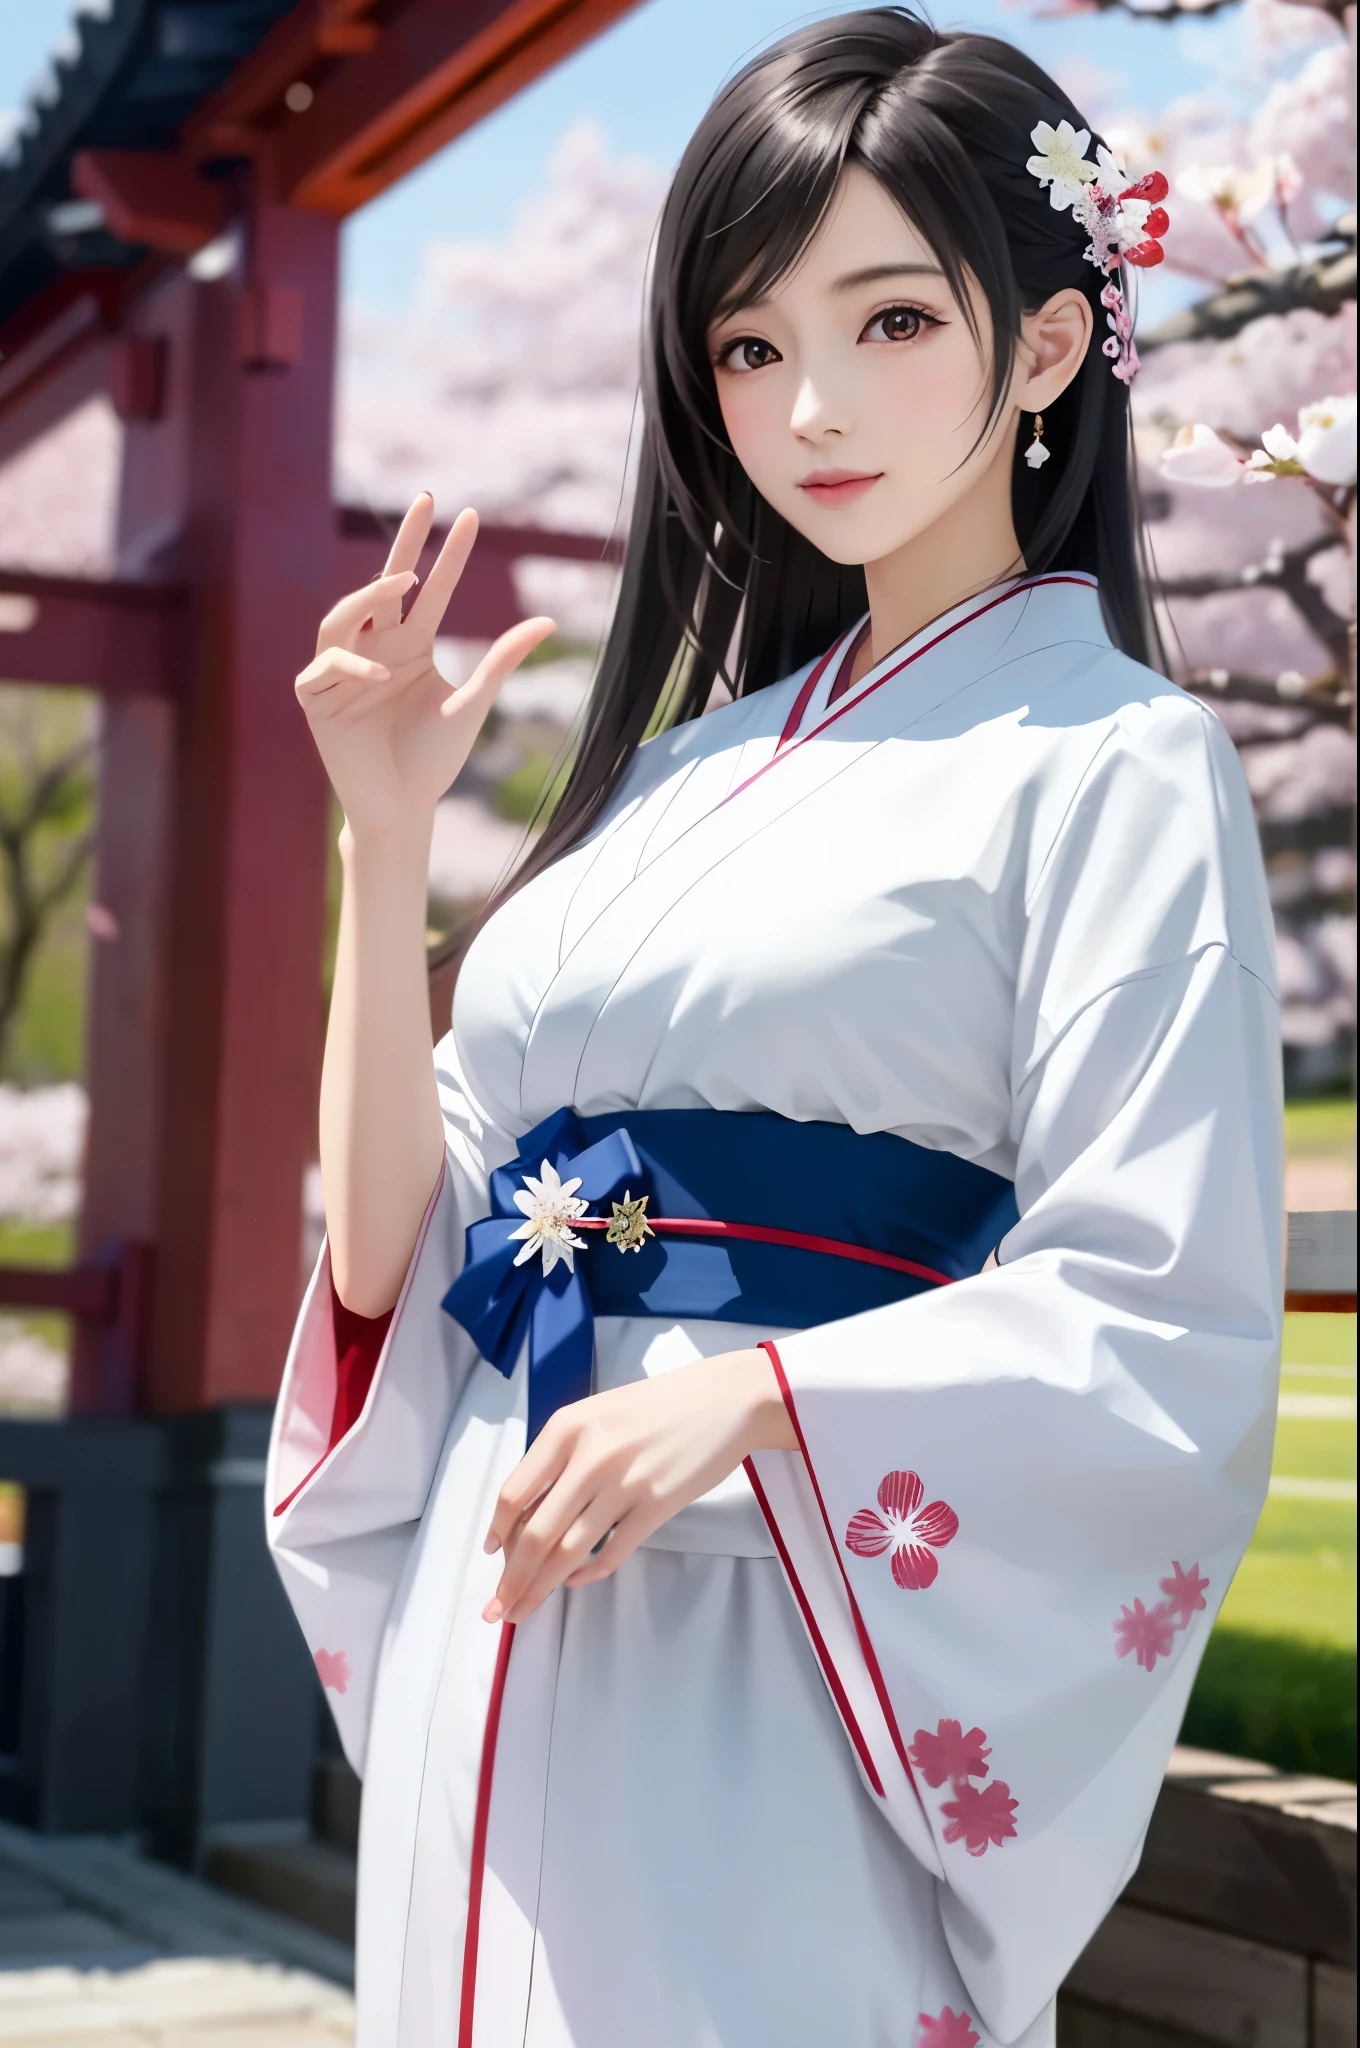 (Top Quality, Masterpiece: 1.1), (Realistic: 1.3), BREAK (((FF7,Tifa_lockhart))),Ultra-detailed face, Detailed red eyes,(black Brown Hair, Large breasts: 1.2), about 18 years old,  (White Japanese Clothing, kimono , Japanese clothes, White cherry blossom pattern, White cherry blossom embroidery pattern, A dark-haired, Beautiful face, Real Face, Beautiful detail eyes, Beautiful skin), Hair flutters in the wind, Hair jumps, Pink cherry blossom tree, Petals flutter, Sakura blizzard, Superb view, morning glow, Sun in the background, the wind, Deities, tusk, myth, Vast Land, kawaii,(cool pose:1.2),Wallpapers, ultra high res, ultra high quality, face focus:1.2